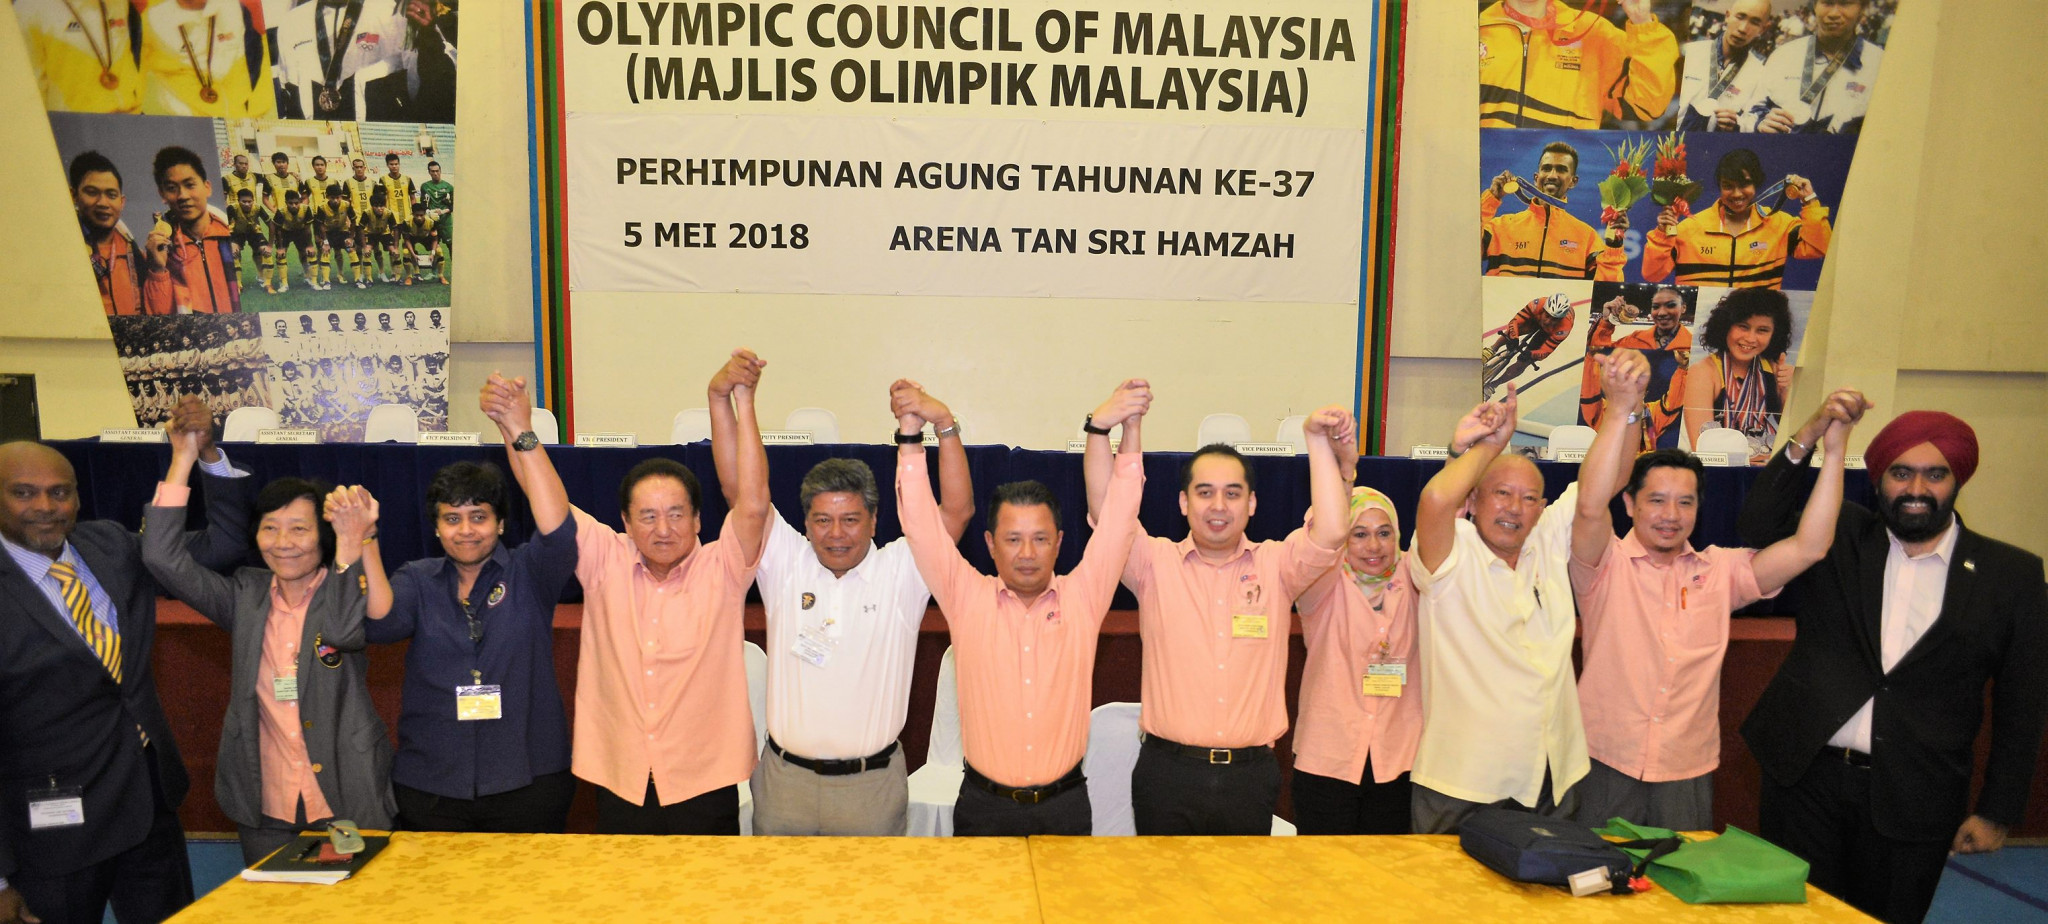 Newly elected Olympic Council of Malaysia officials celebrate following their election today ©Olympic Council of Malaysia/Facebook